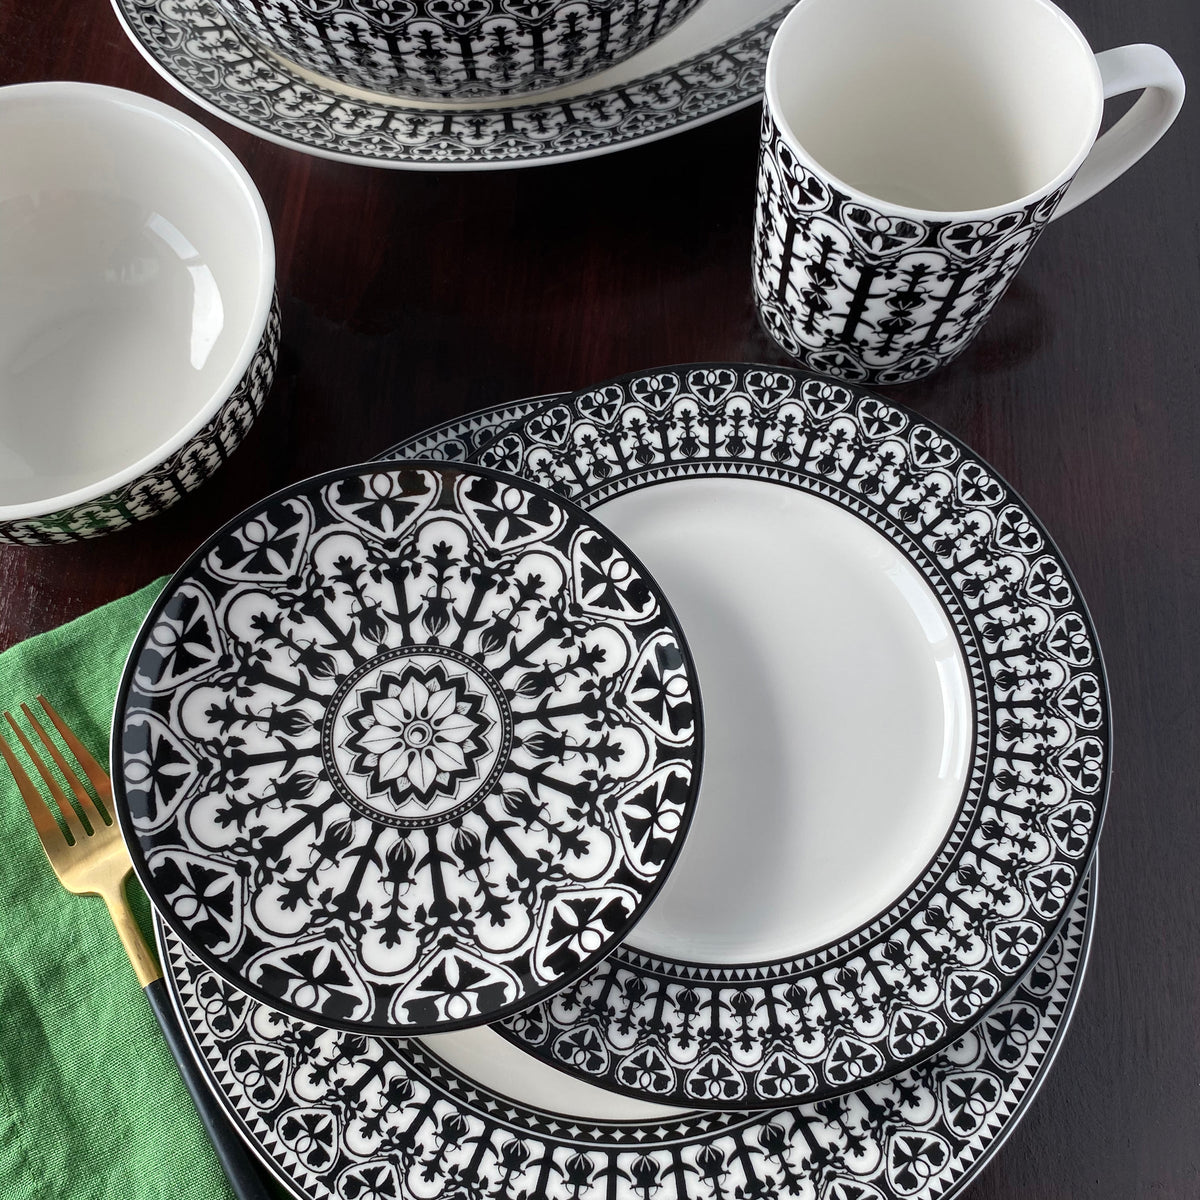 A set of heirloom-quality, Casablanca Small Plates by Caskata Artisanal Home, including porcelain plates, a bowl, and a mug, is elegantly arranged on a dark surface with a green napkin and a gold fork.